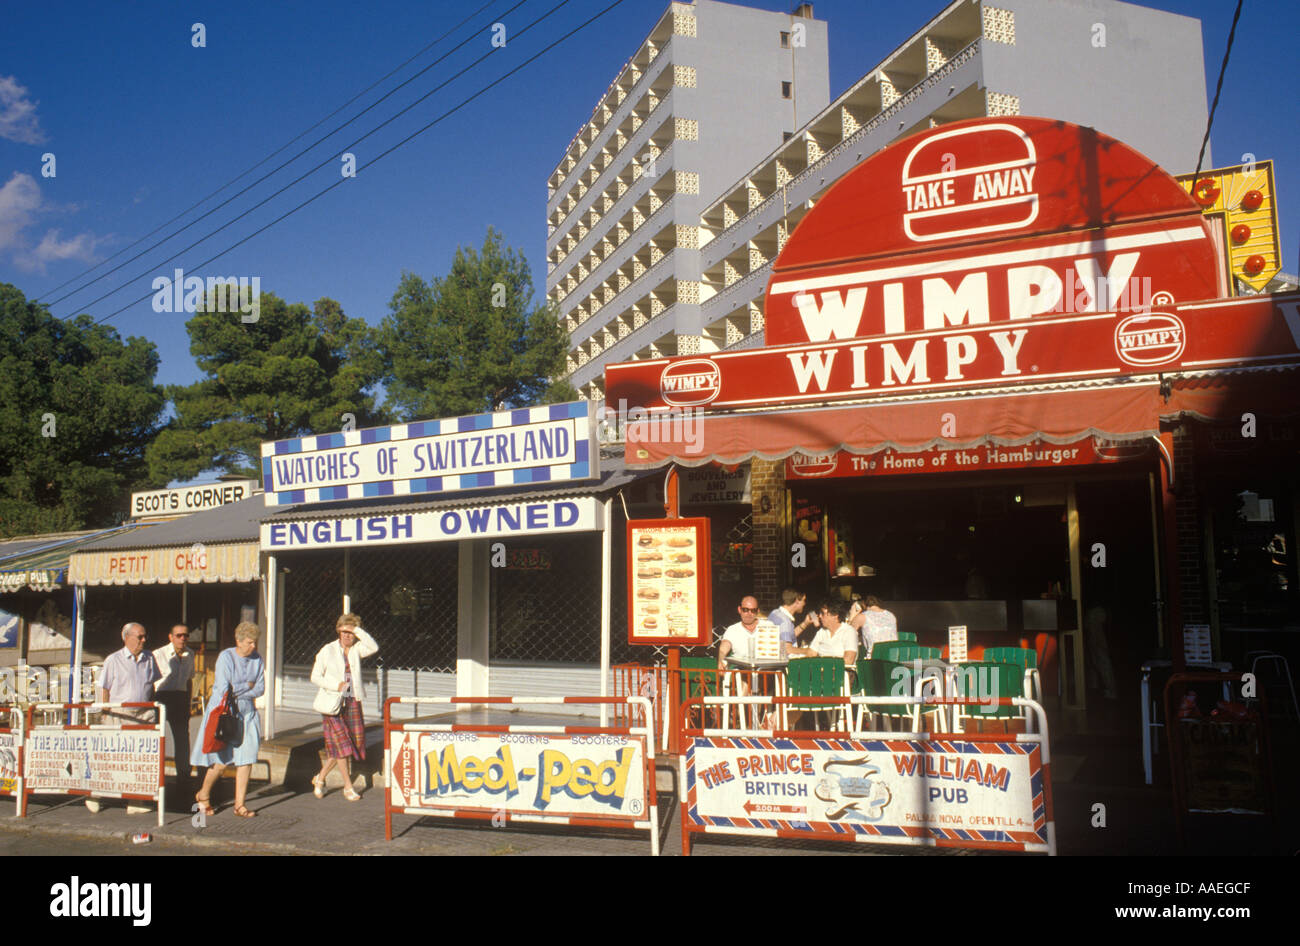 1980s tourism Spain Magaluf Majorca English owned bars restaurants Take Away Wimpy fast food Magaluf. HOMER SYKES Stock Photo